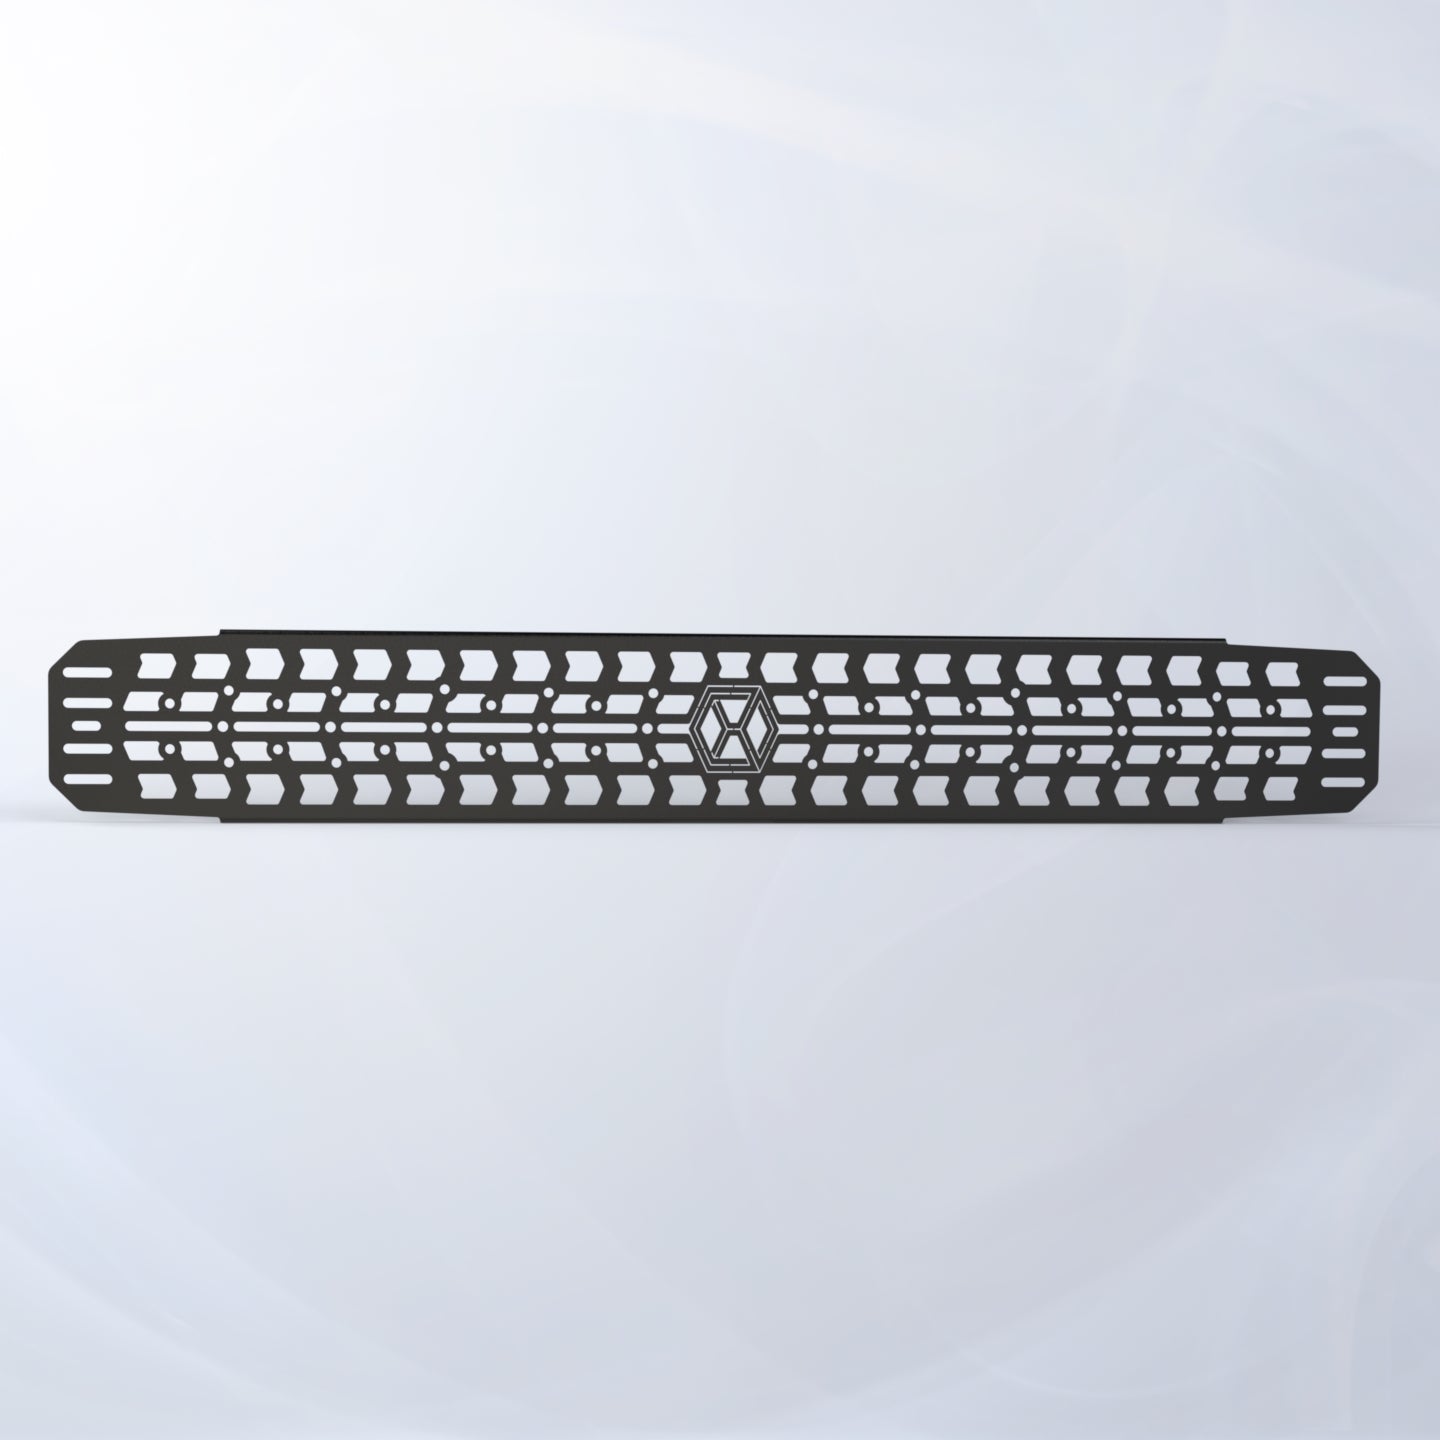 Tread Molle Plate - Stainless Steel Black 6" x 48"